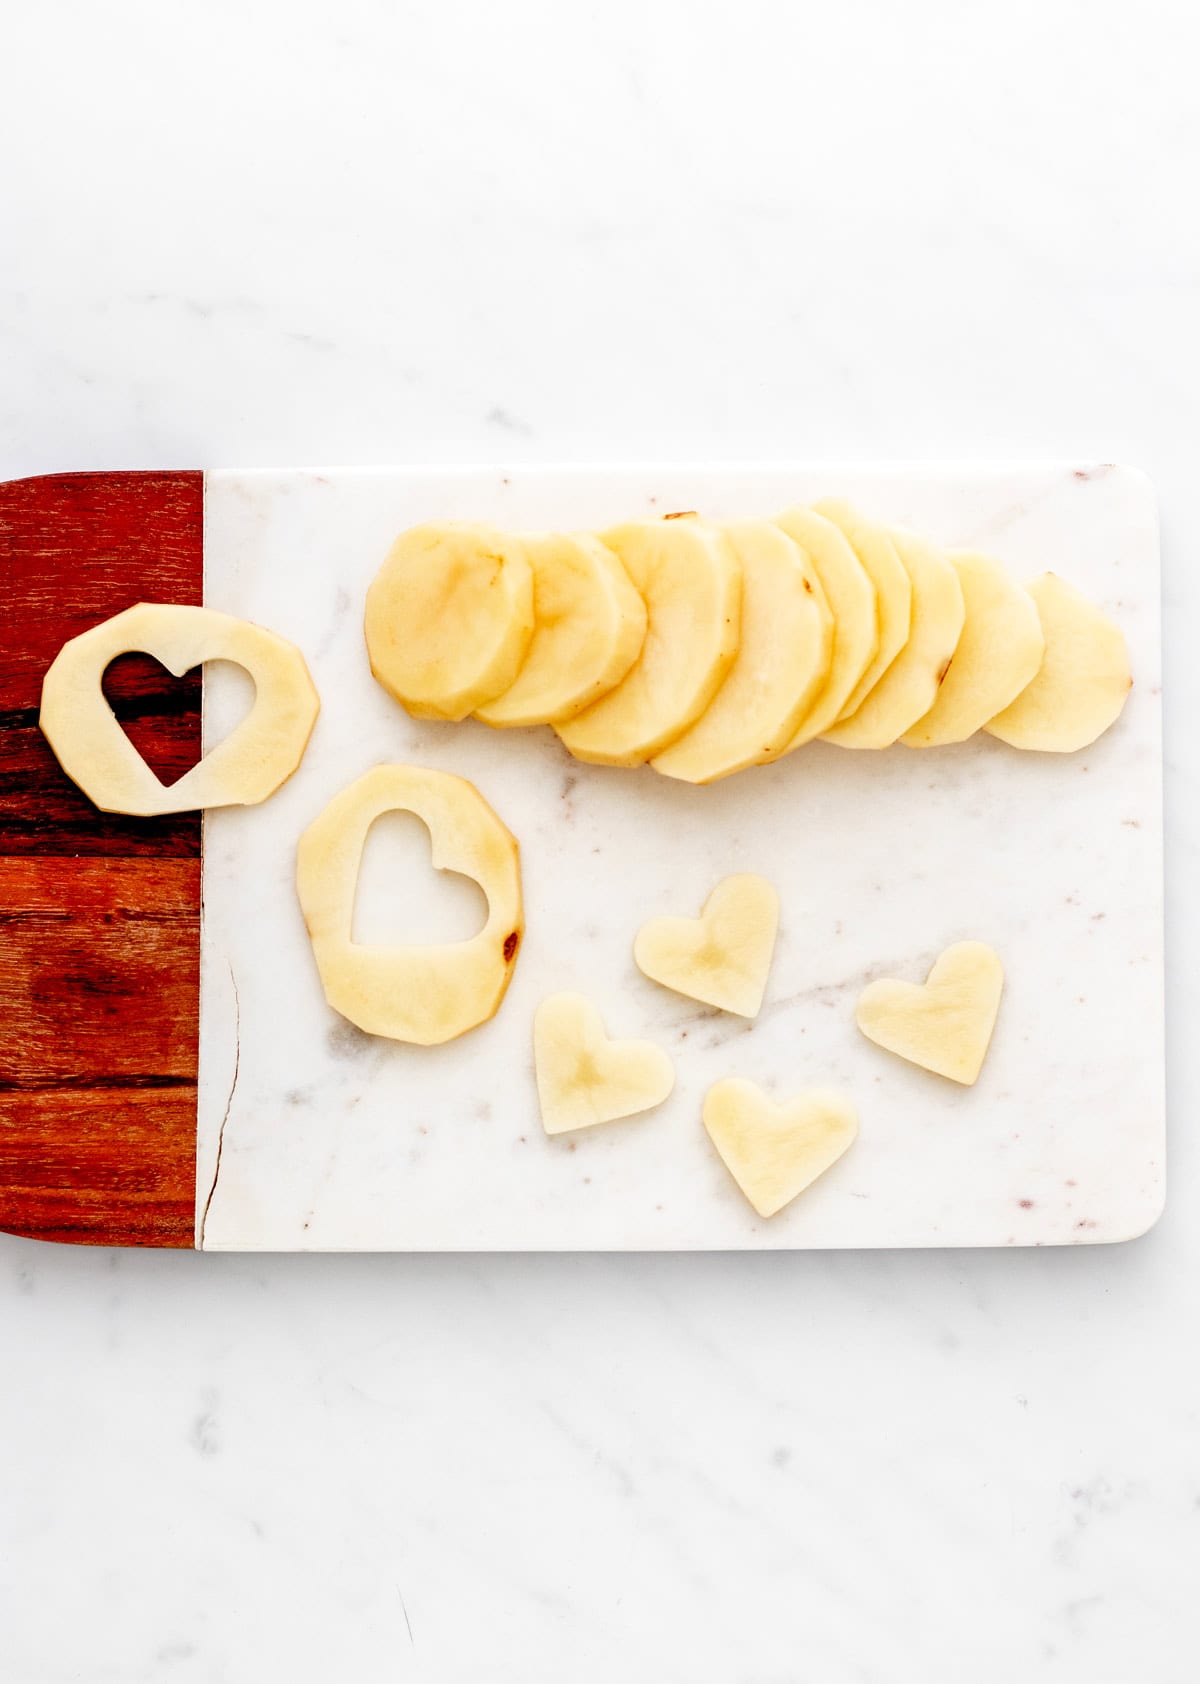 Cutting heart shapes out of the potato slices on a wood cutting board.